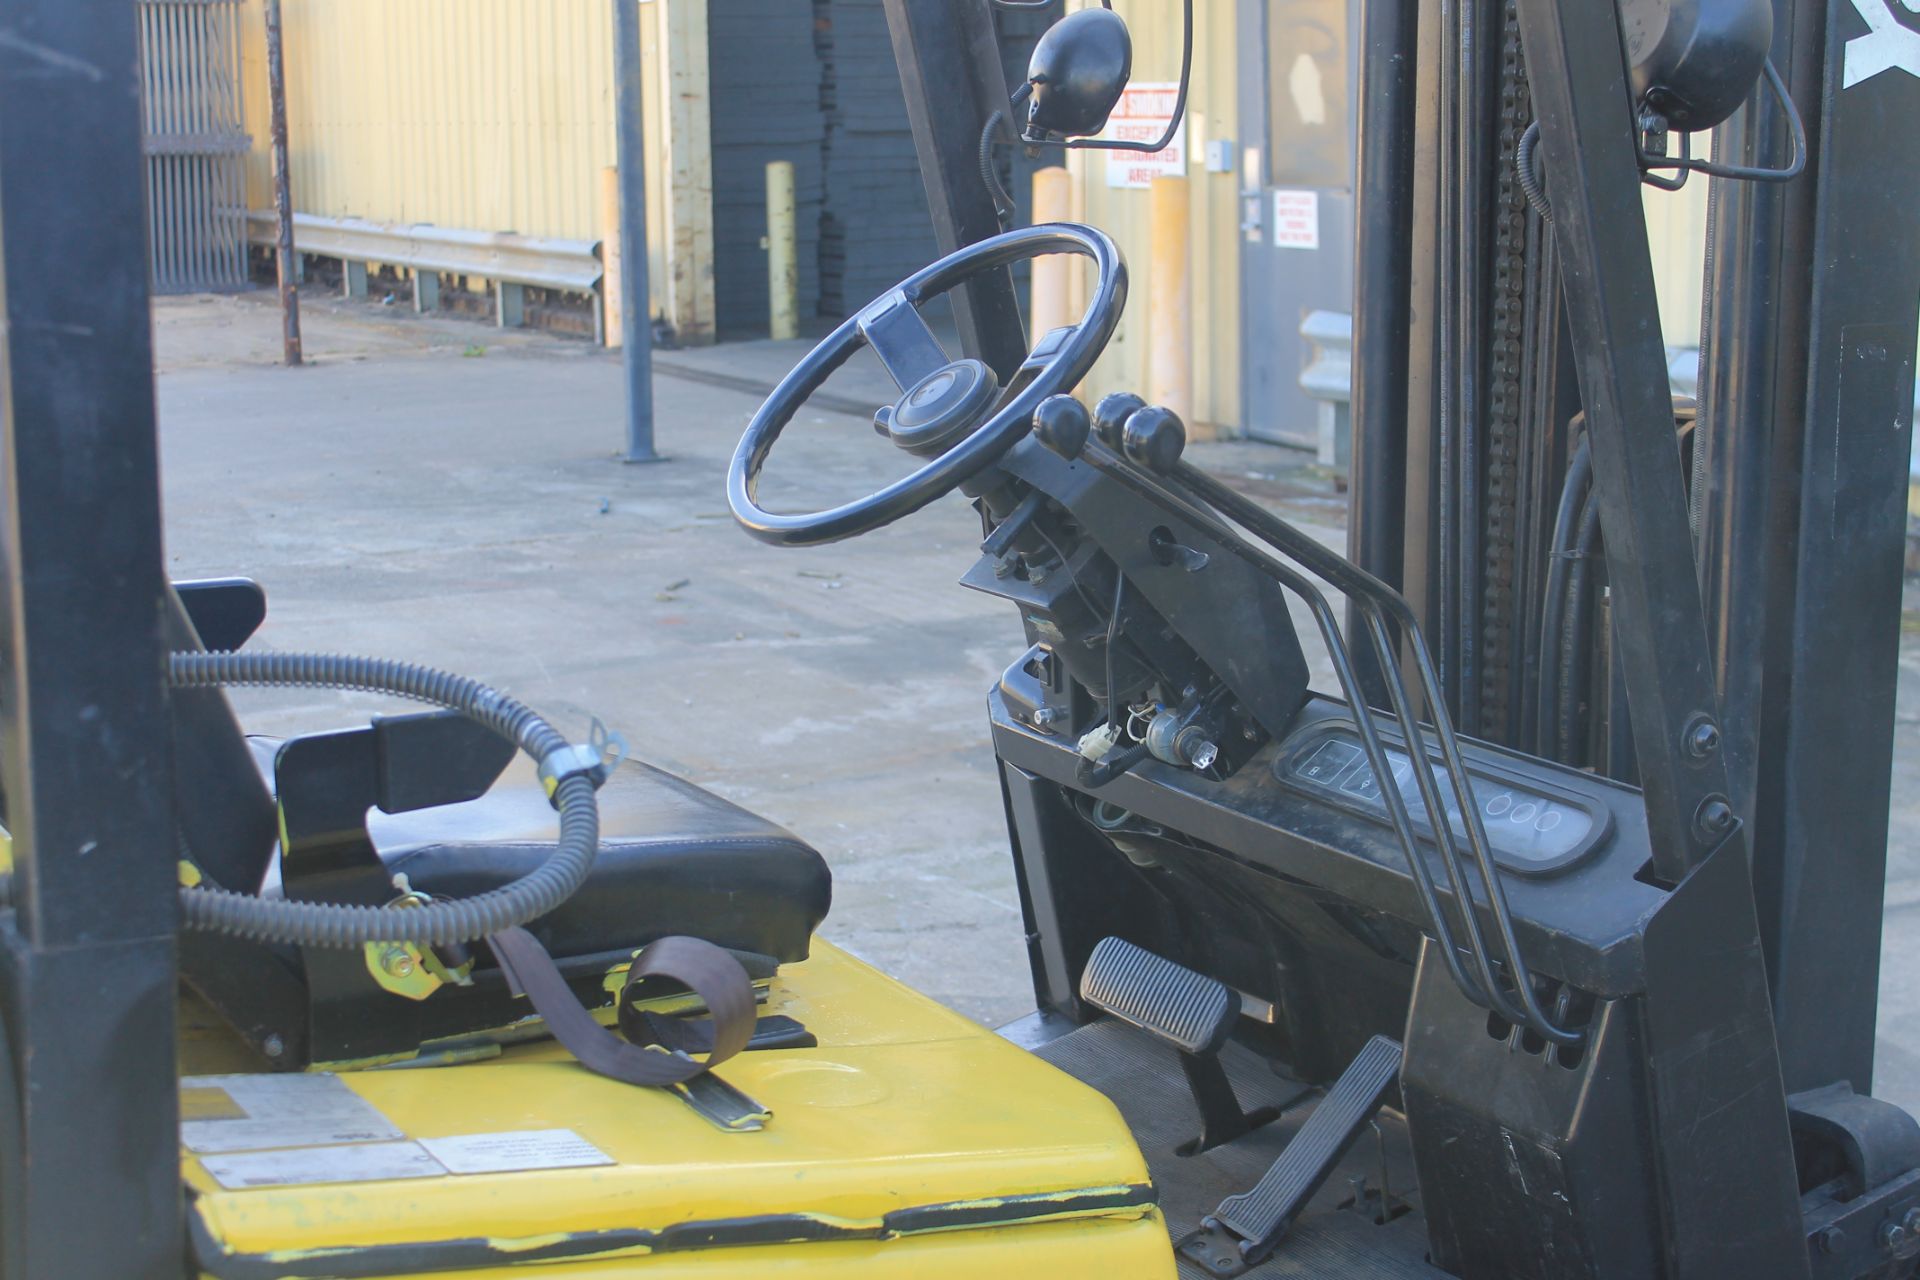 1991 YALE PROPANE FORKLIFT 4000 CAPACITY, 6340 HRS (WATCH VIDEO) - Image 5 of 6